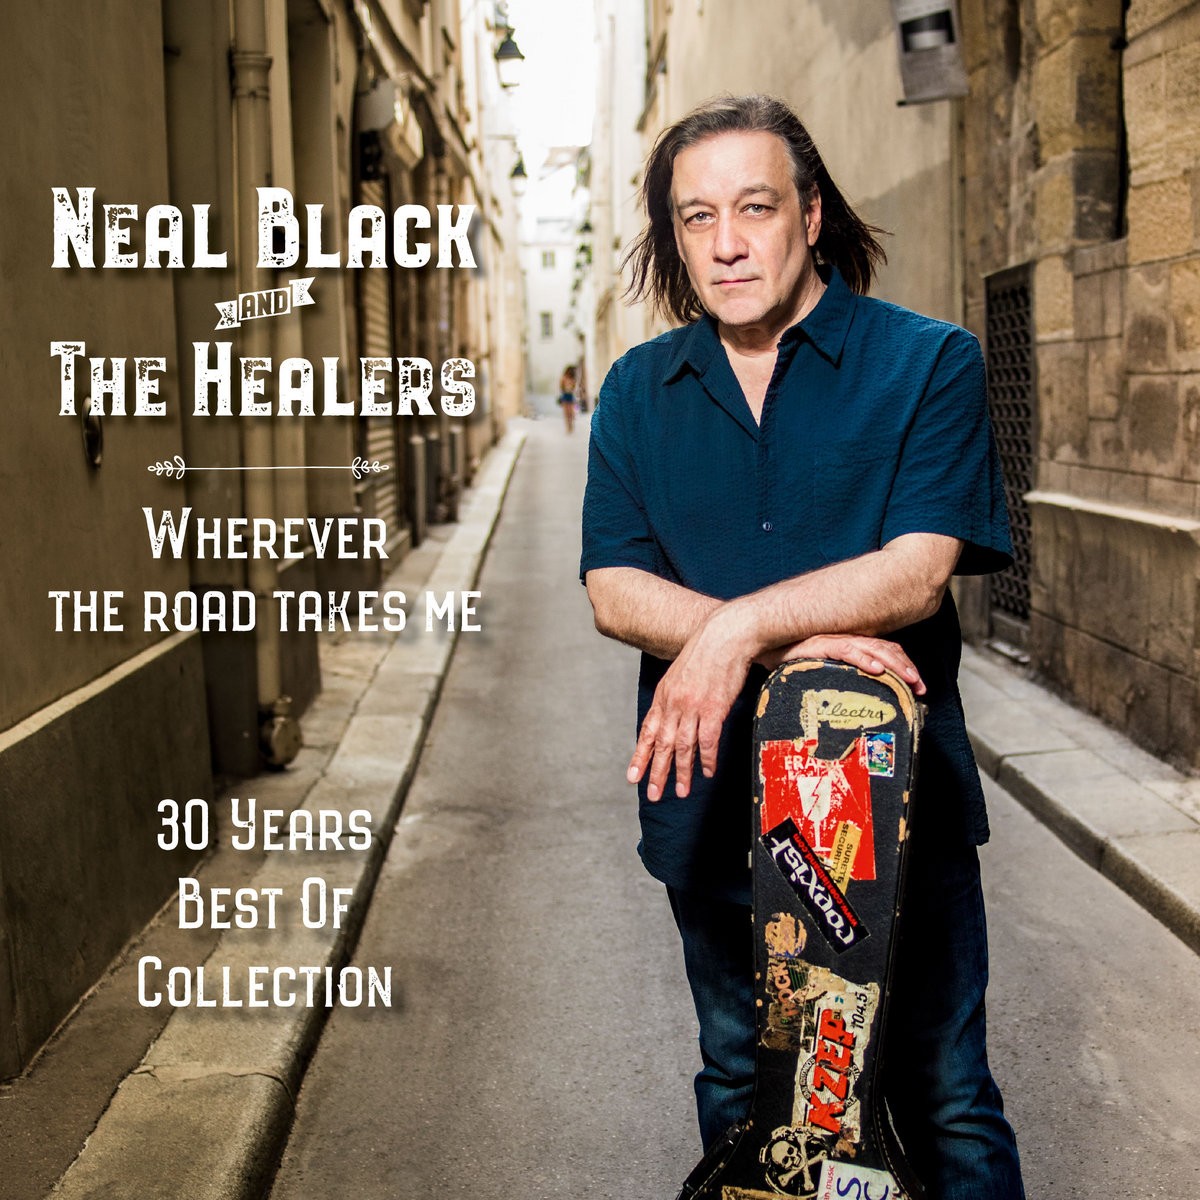 Neal Black and The healers - Wherever The Road Takes Me - 30 Years Best Of Collection